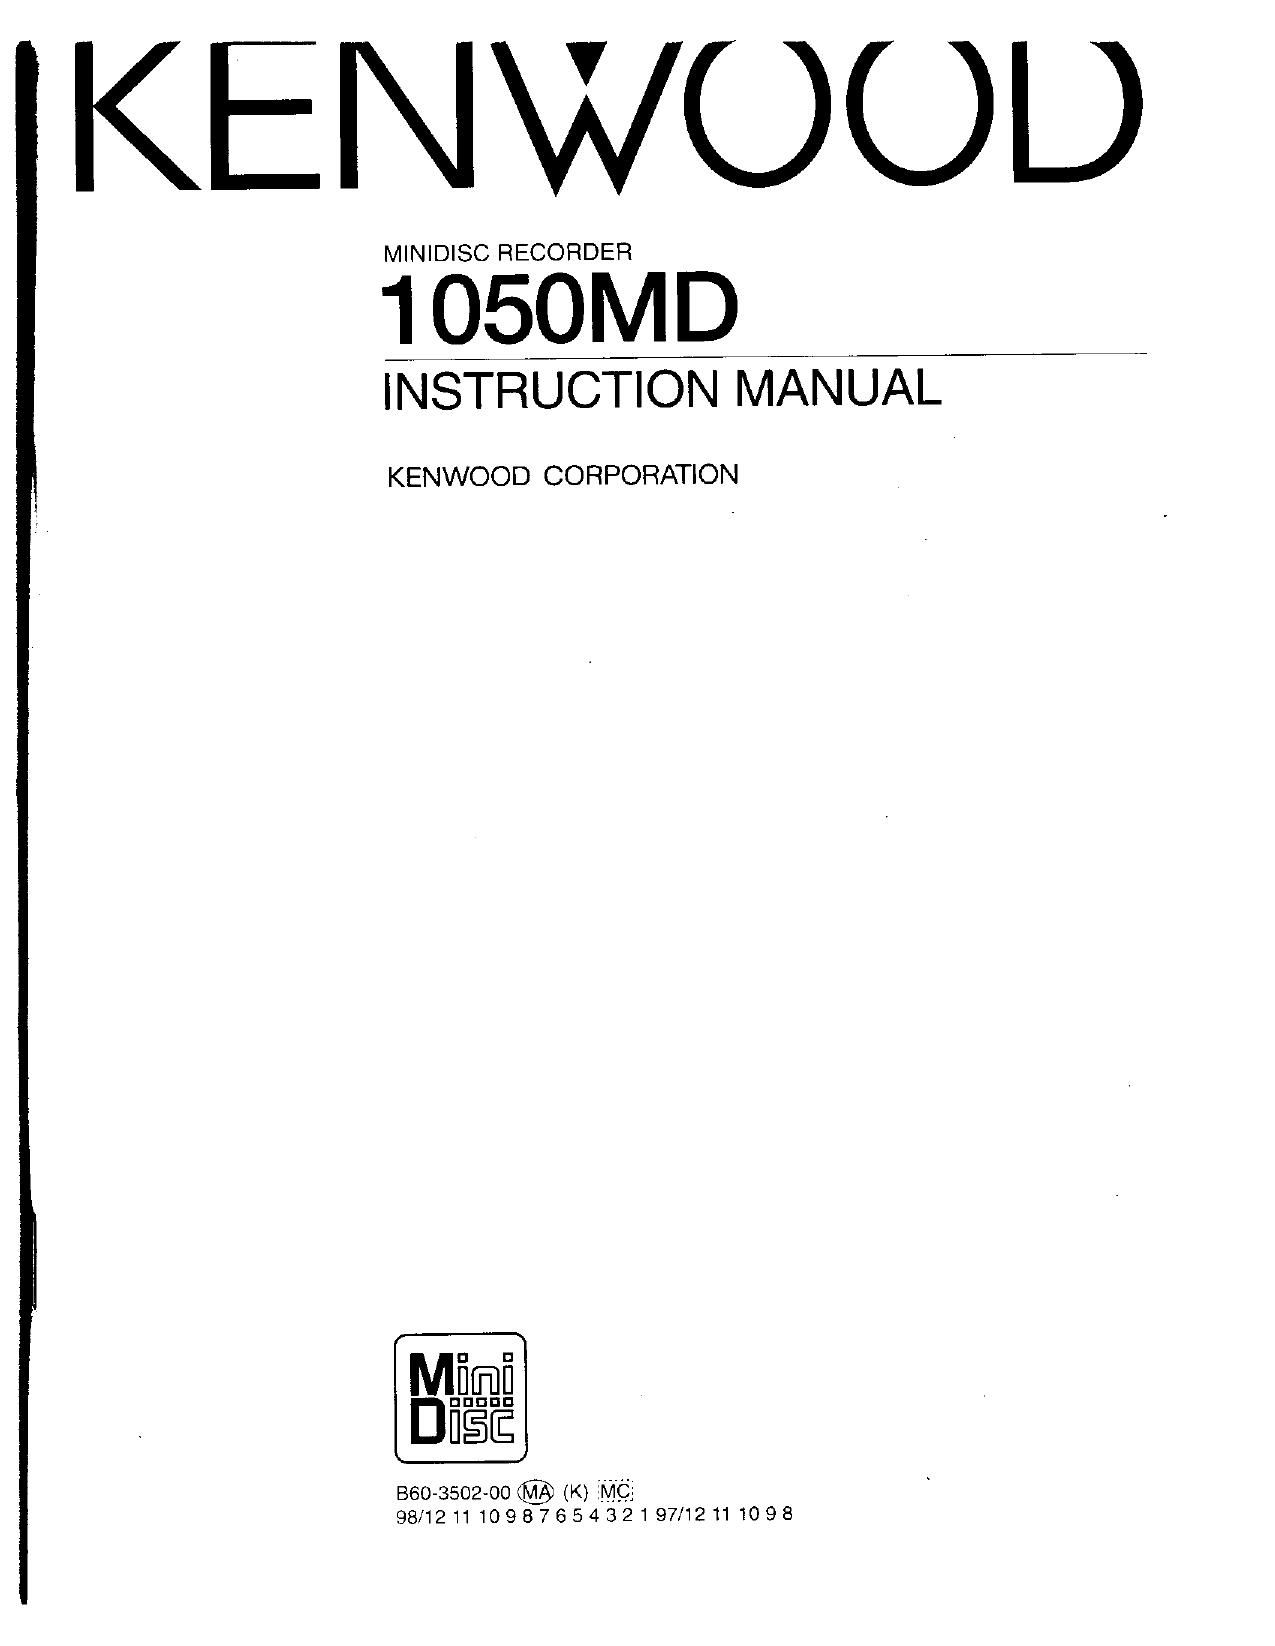 Kenwood 1050 MD Owners Manual